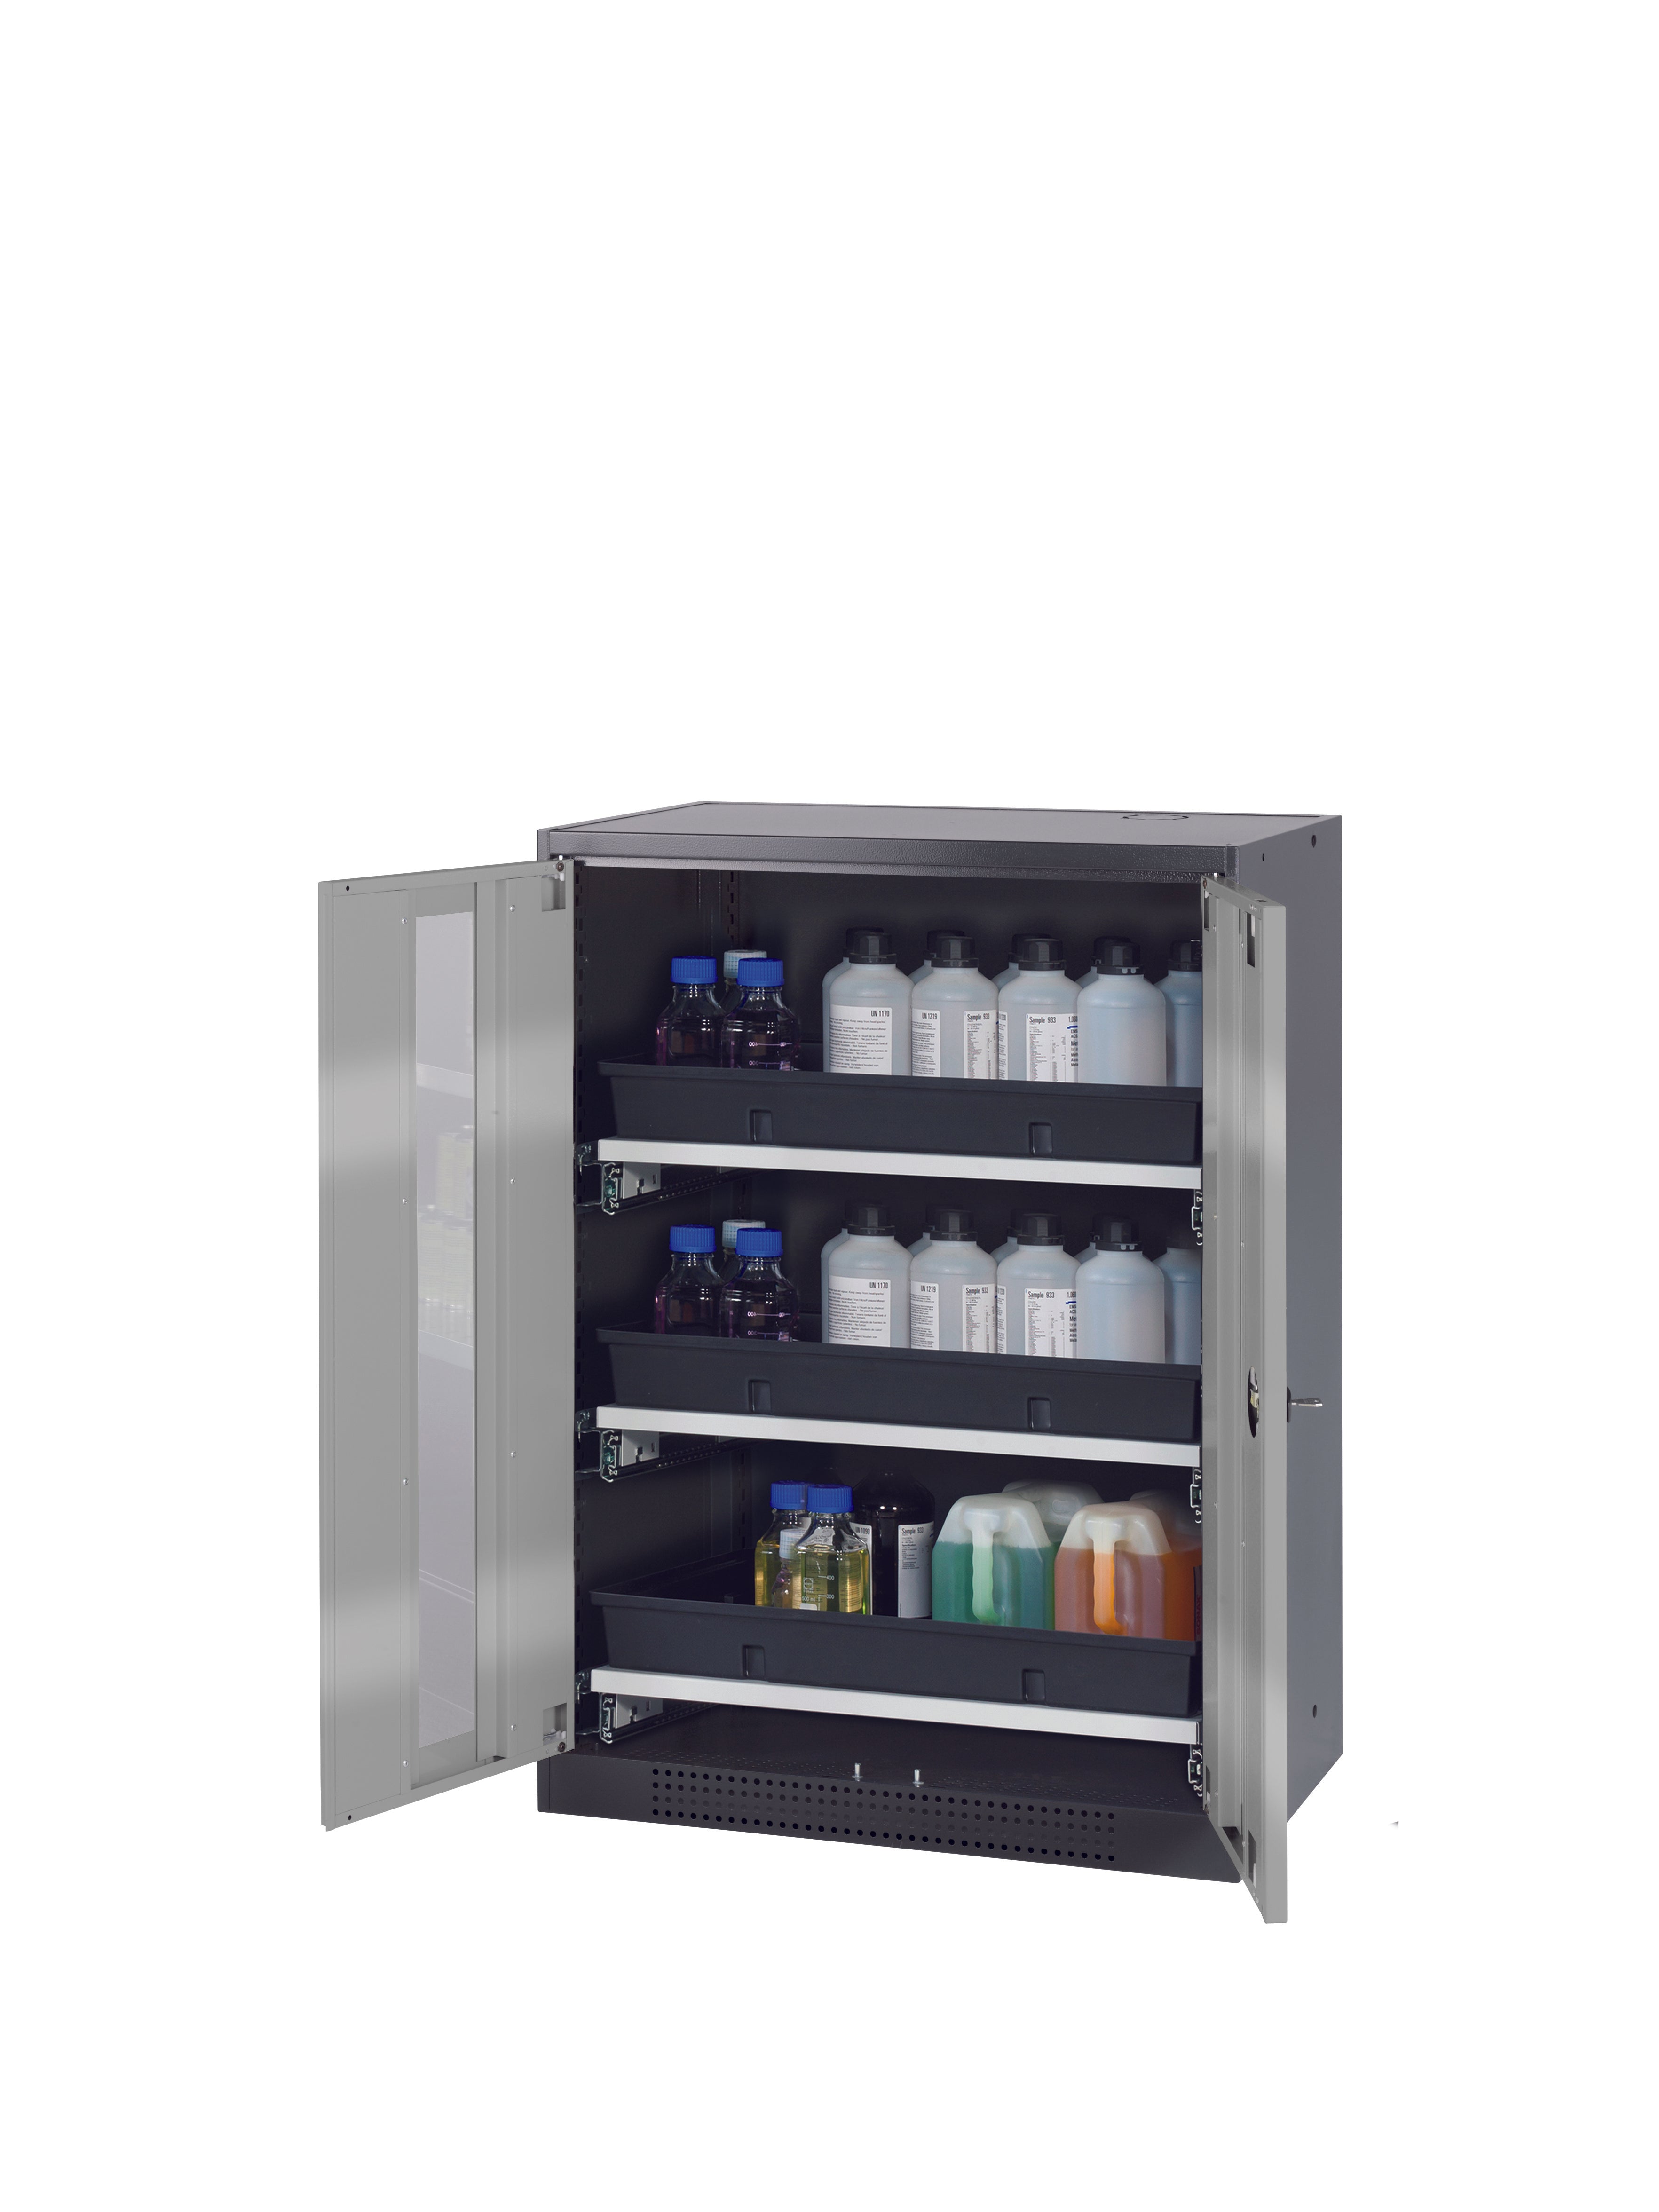 Chemical cabinet CS-CLASSIC-G model CS.110.081.WDFW in asecos silver with 3x AbZ pull-out shelves (sheet steel/polypropylene)